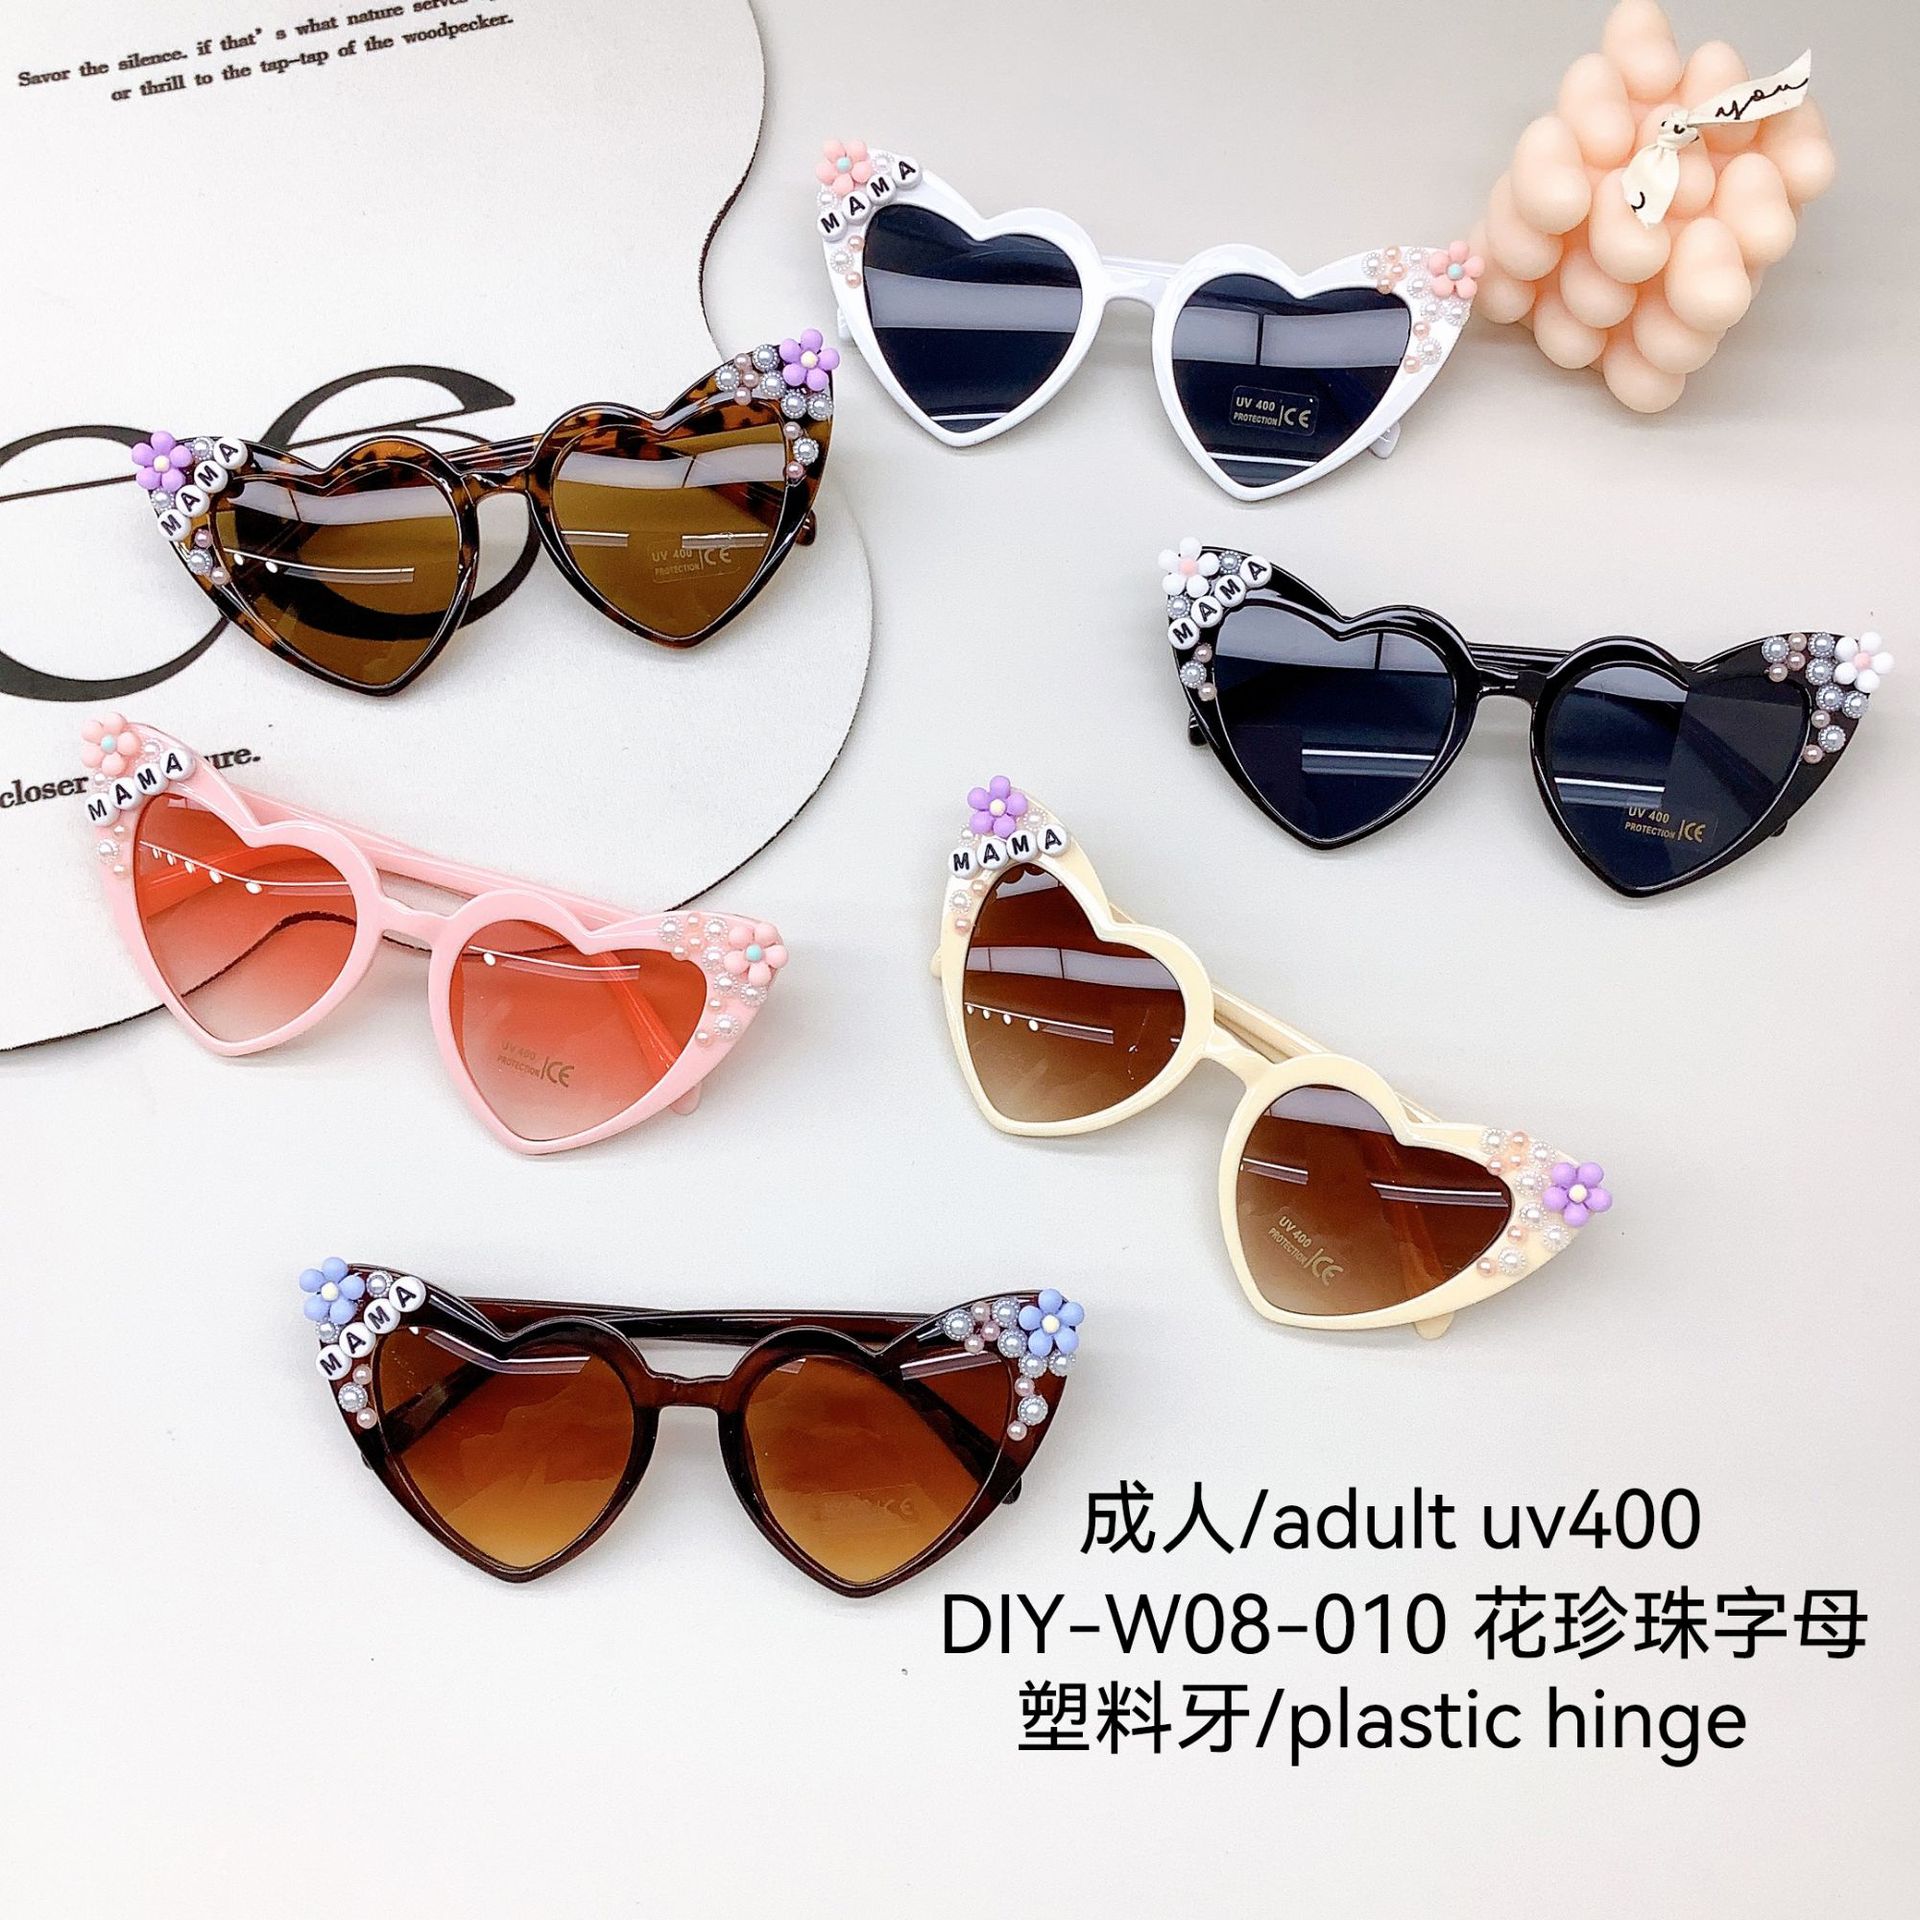 Internet Celebrity Concave Shape All-Match Love Kids Sunglasses Travel Cute Baby Sunglasses Girl Uv Protection Glasses